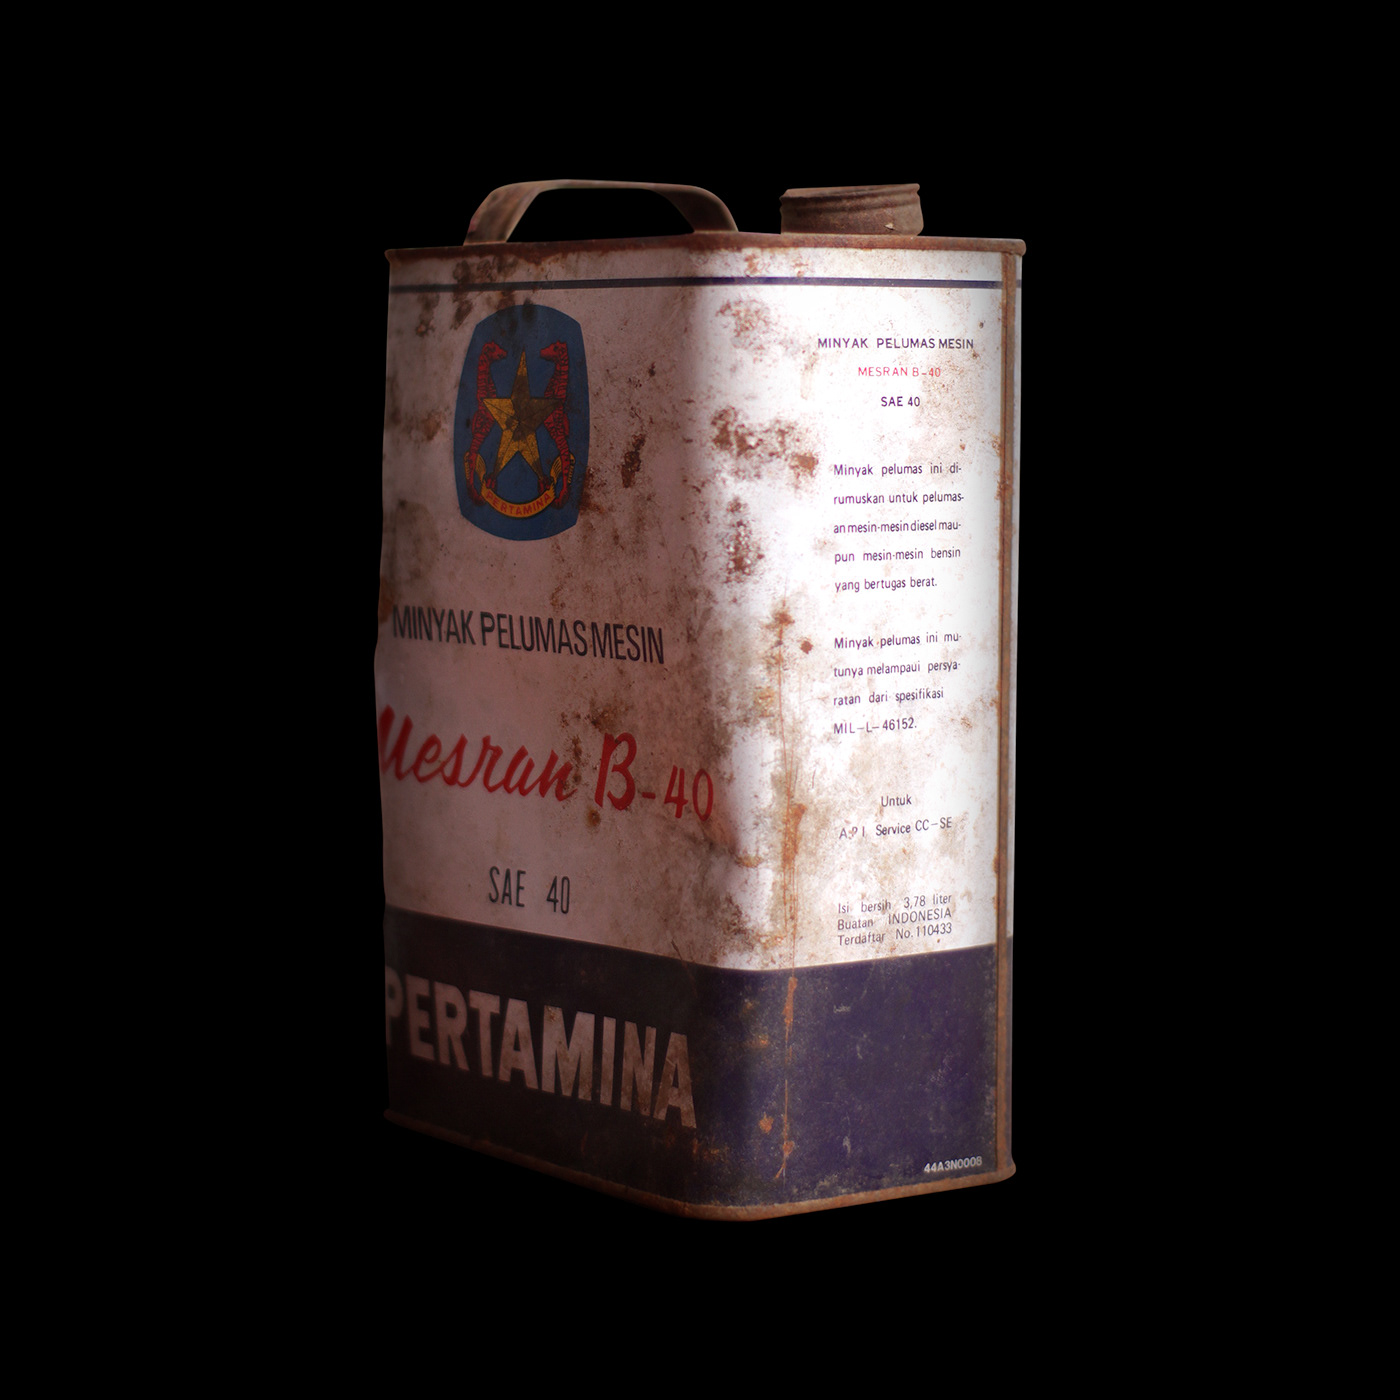 Archive Indonesian Label old Packaging vintage vintage label Vintage Packaging